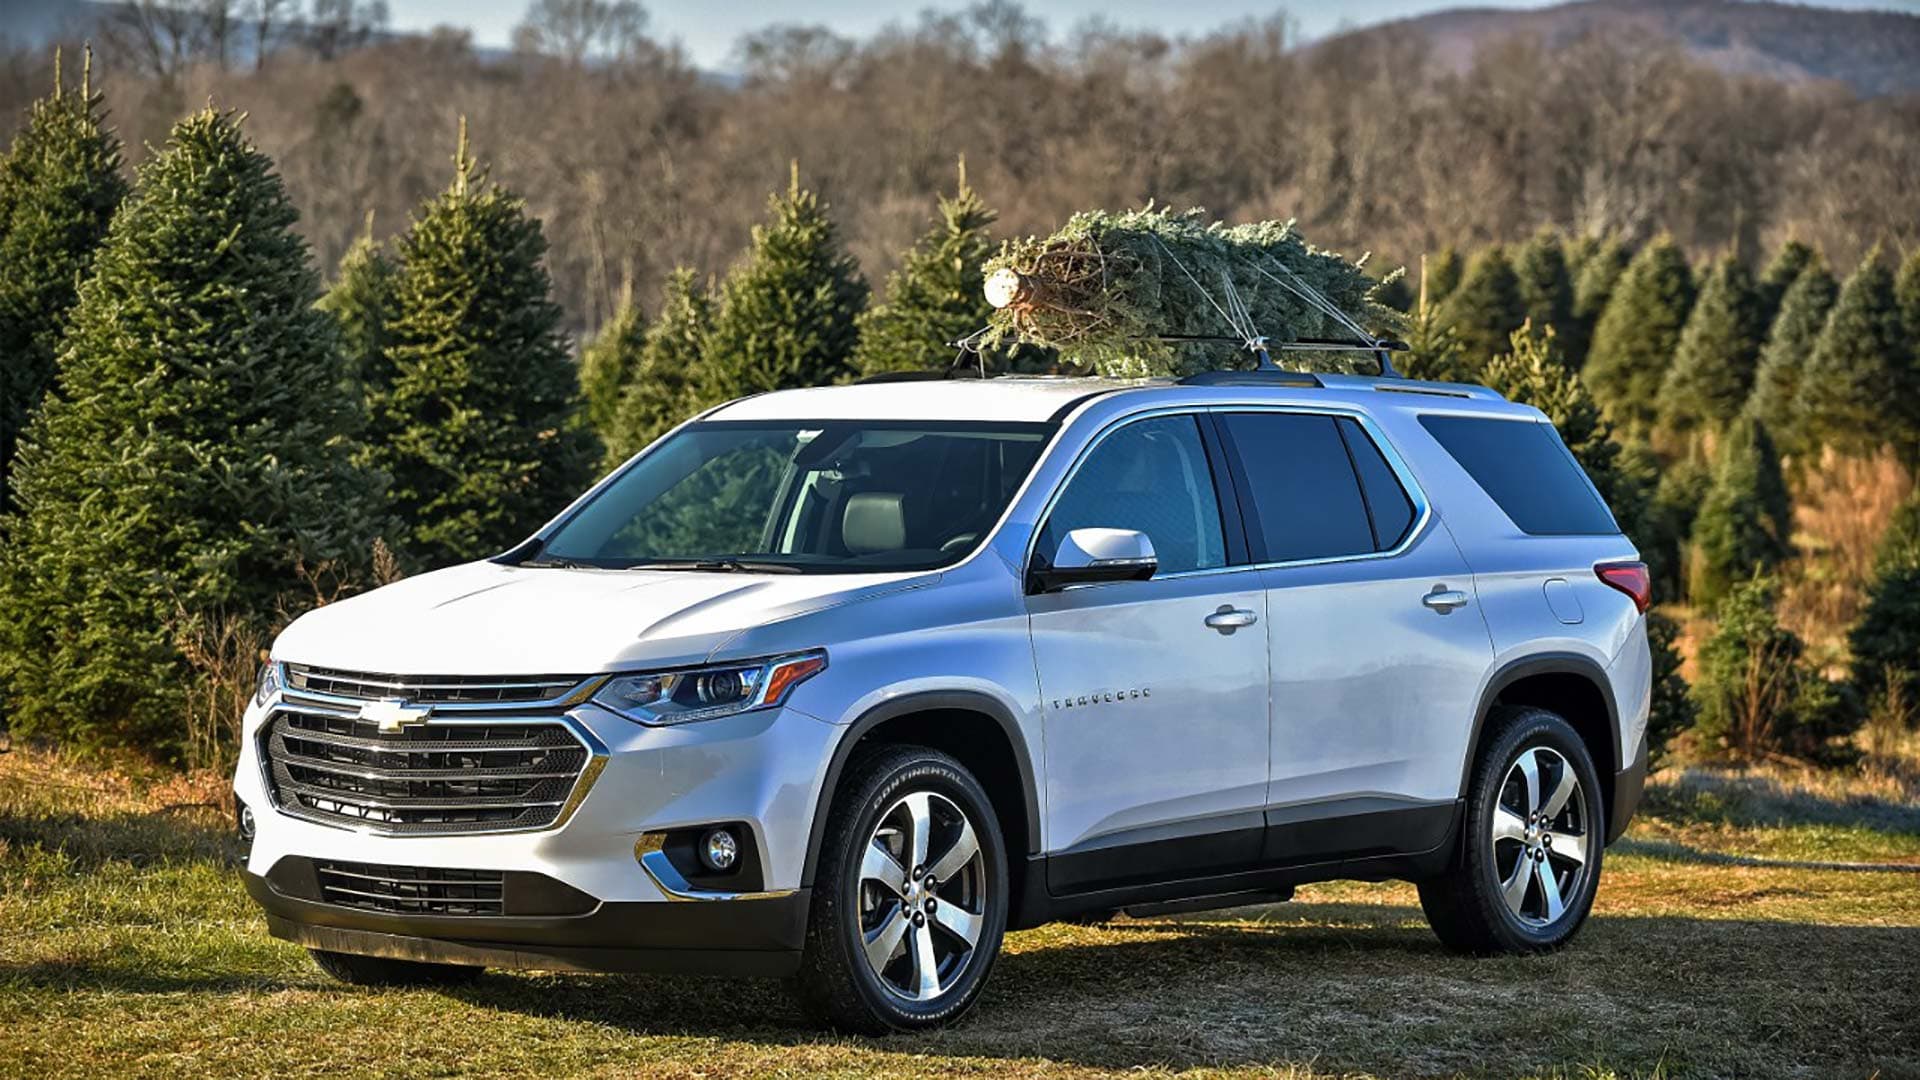 Chevy Releases Helpful Tips Regarding Safe Transportation of Your Perfect Christmas Tree